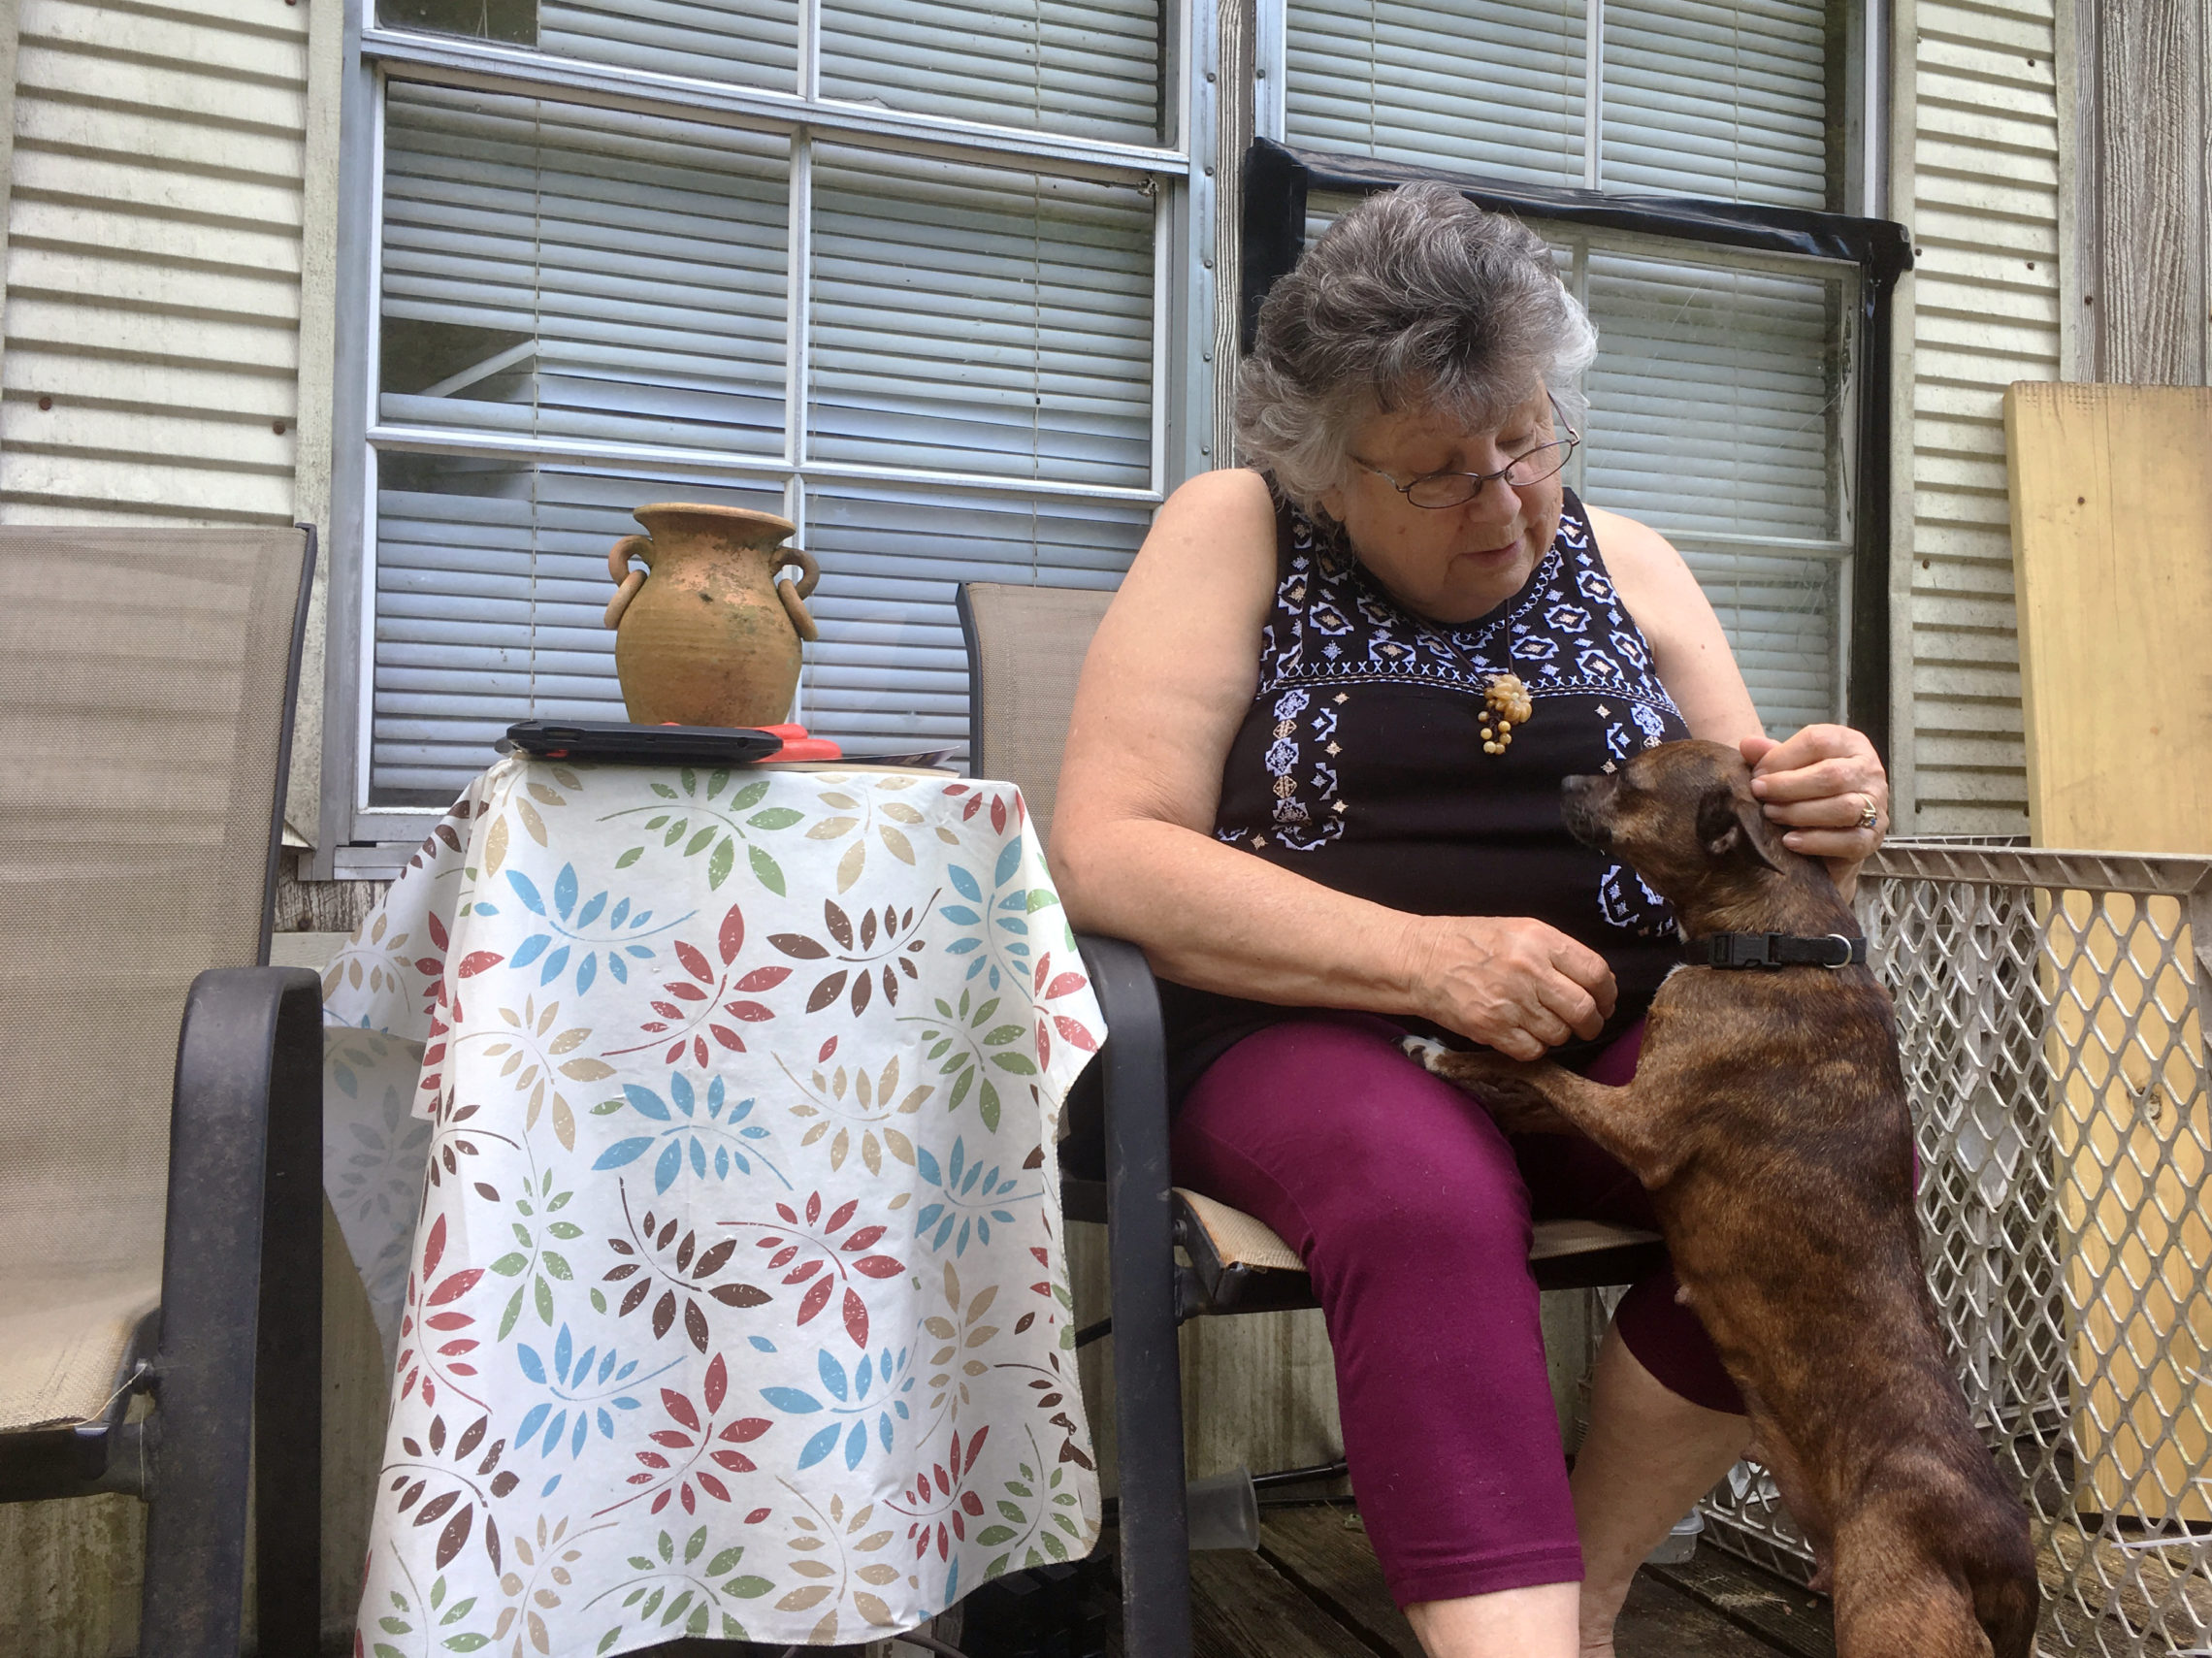 Leitha Dollarhyde, a retired caregiver who lives in a rural town near Whitesburg, Ky., says she could not afford an unexpected $1,000 expense. CREDIT: Sydney Boles for NPR